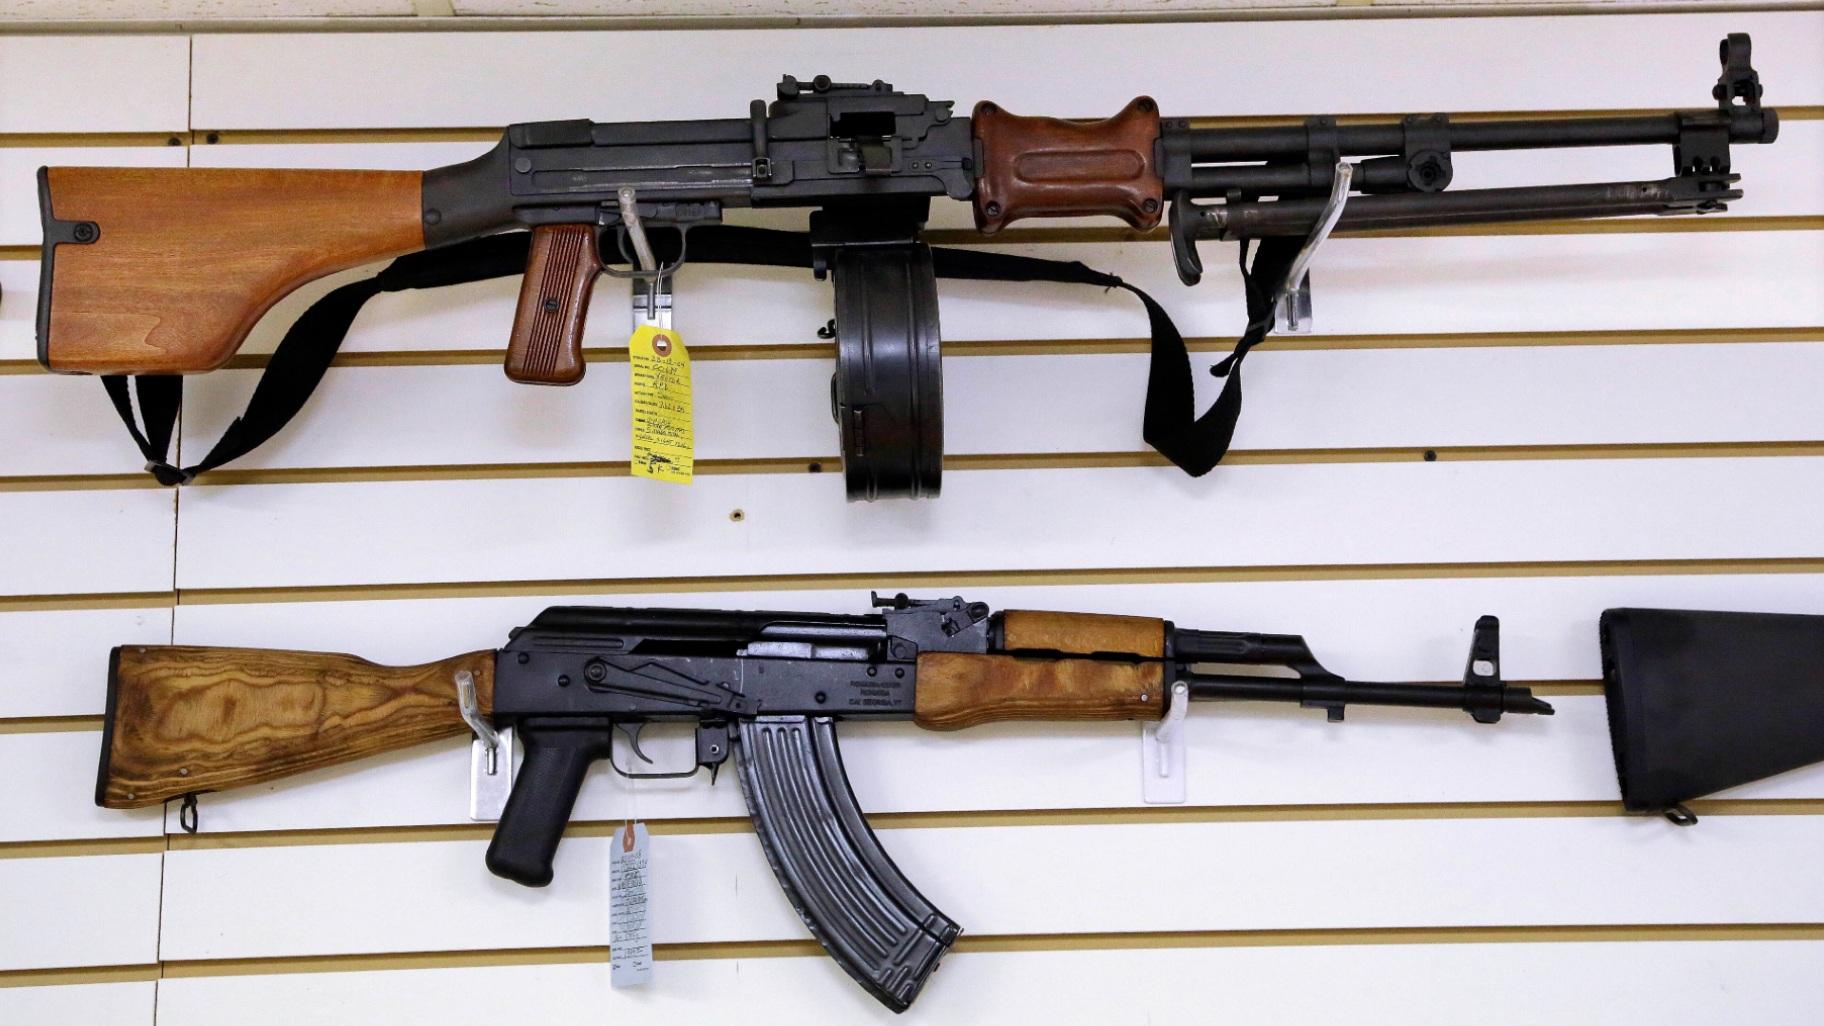 FILE - Assault weapons are seen for sale at Capitol City Arms Supply on Jan. 16, 2013 in Springfield, Ill. (AP Photo / Seth Perlman, File)